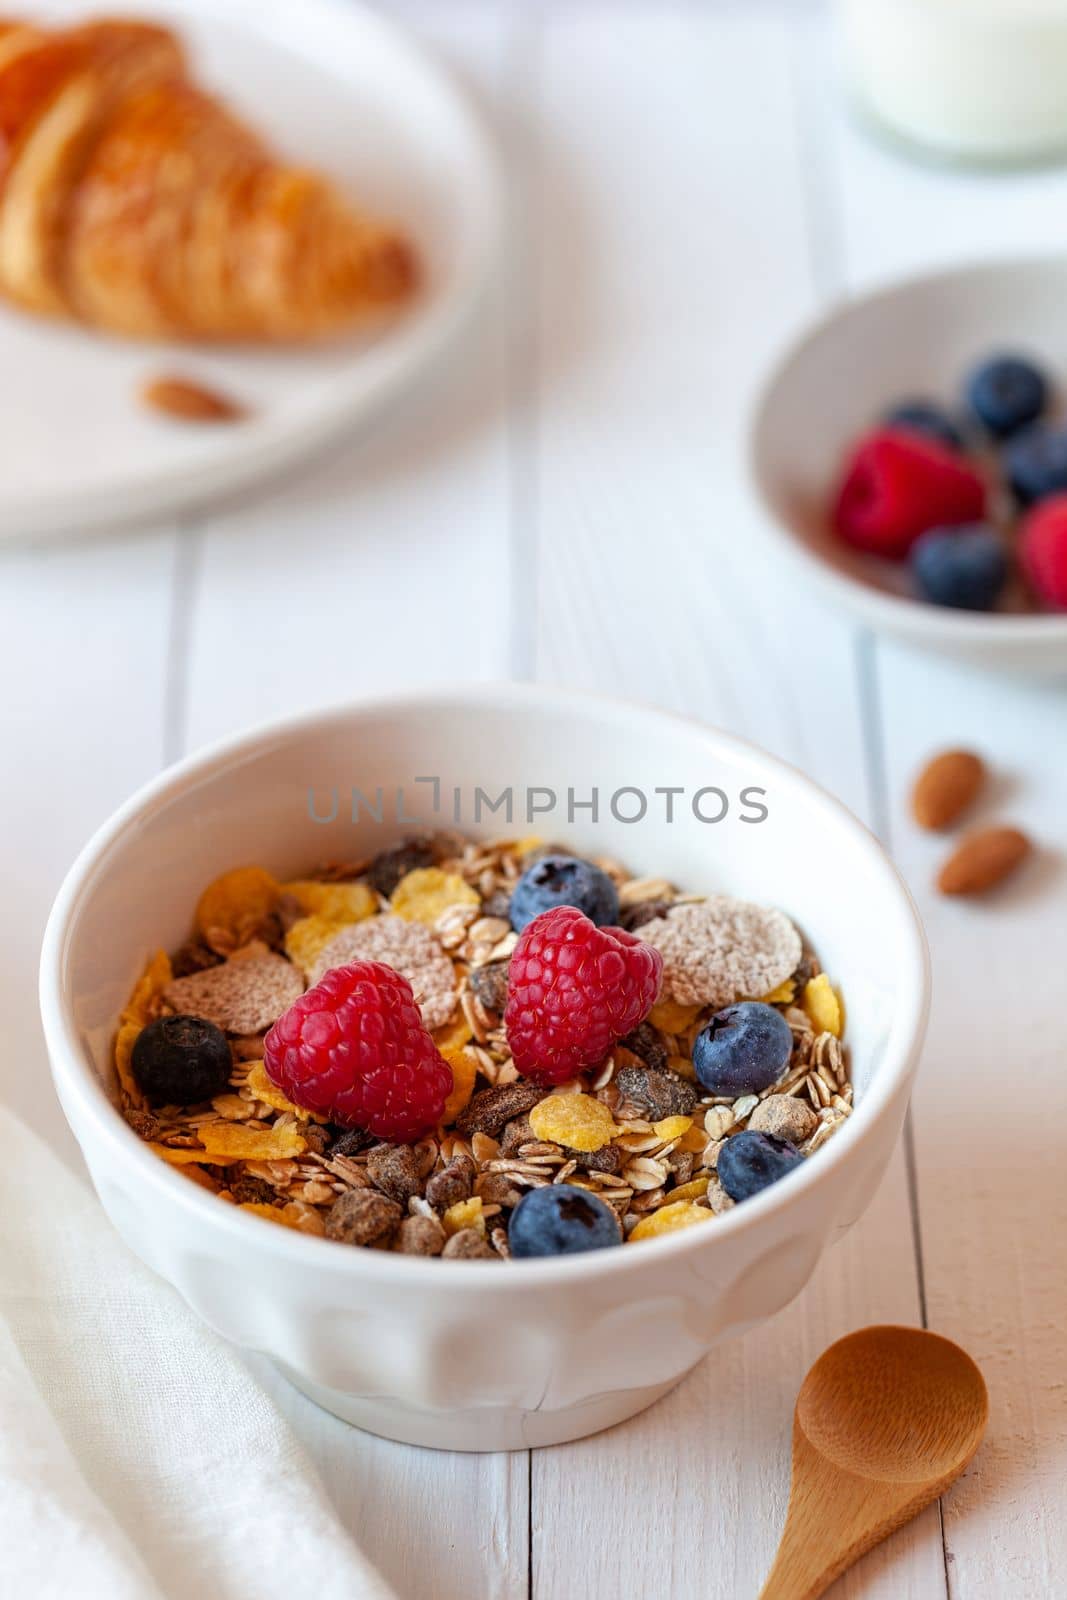 Breakfast bowl of oat flakes with berries, yoghurt and croissant by lanych